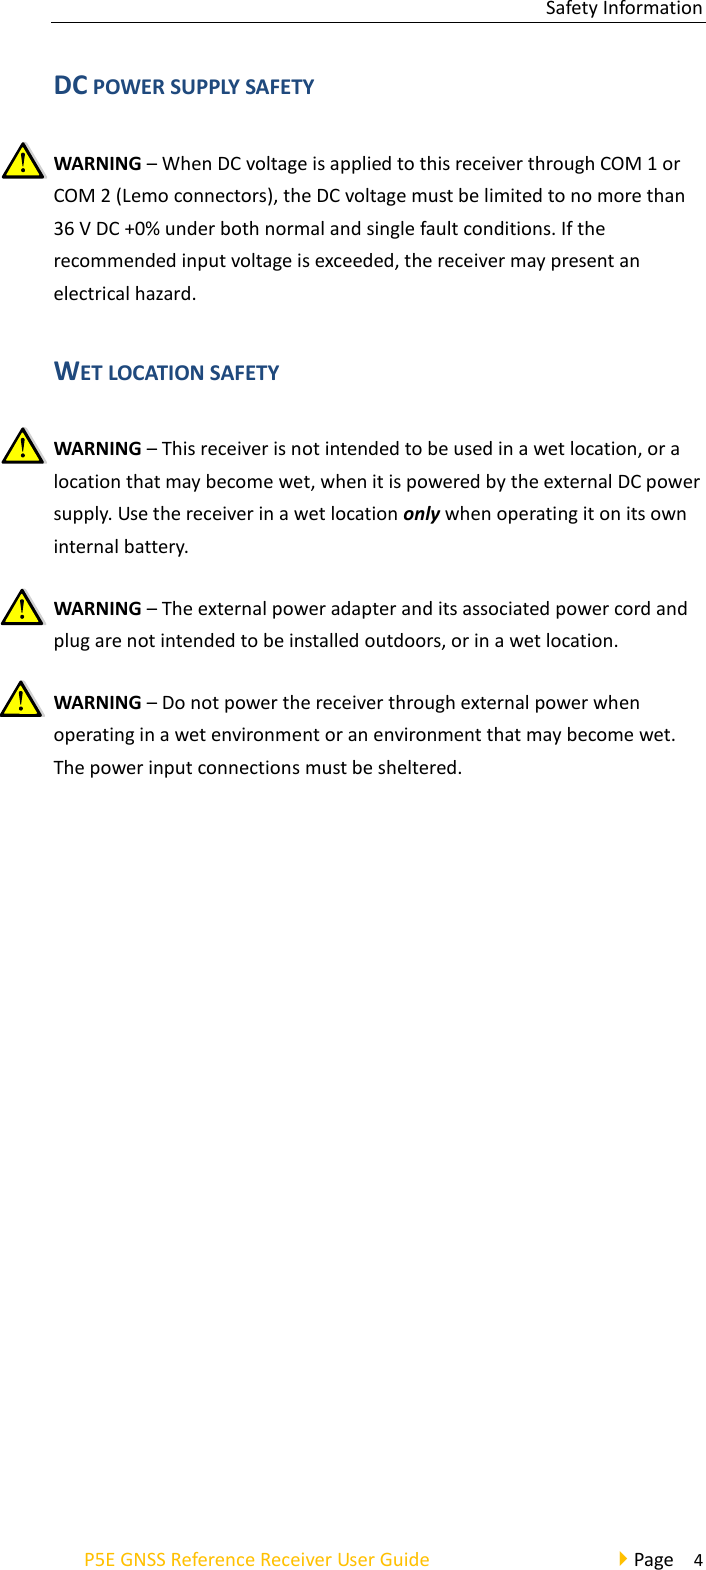 Safety Information P5E GNSS Reference Receiver User Guide                                     Page    4 DC POWER SUPPLY SAFETY WARNING – When DC voltage is applied to this receiver through COM 1 or COM 2 (Lemo connectors), the DC voltage must be limited to no more than 36 V DC +0% under both normal and single fault conditions. If the recommended input voltage is exceeded, the receiver may present an electrical hazard. WET LOCATION SAFETY WARNING – This receiver is not intended to be used in a wet location, or a location that may become wet, when it is powered by the external DC power supply. Use the receiver in a wet location only when operating it on its own internal battery. WARNING – The external power adapter and its associated power cord and plug are not intended to be installed outdoors, or in a wet location. WARNING – Do not power the receiver through external power when operating in a wet environment or an environment that may become wet. The power input connections must be sheltered.   